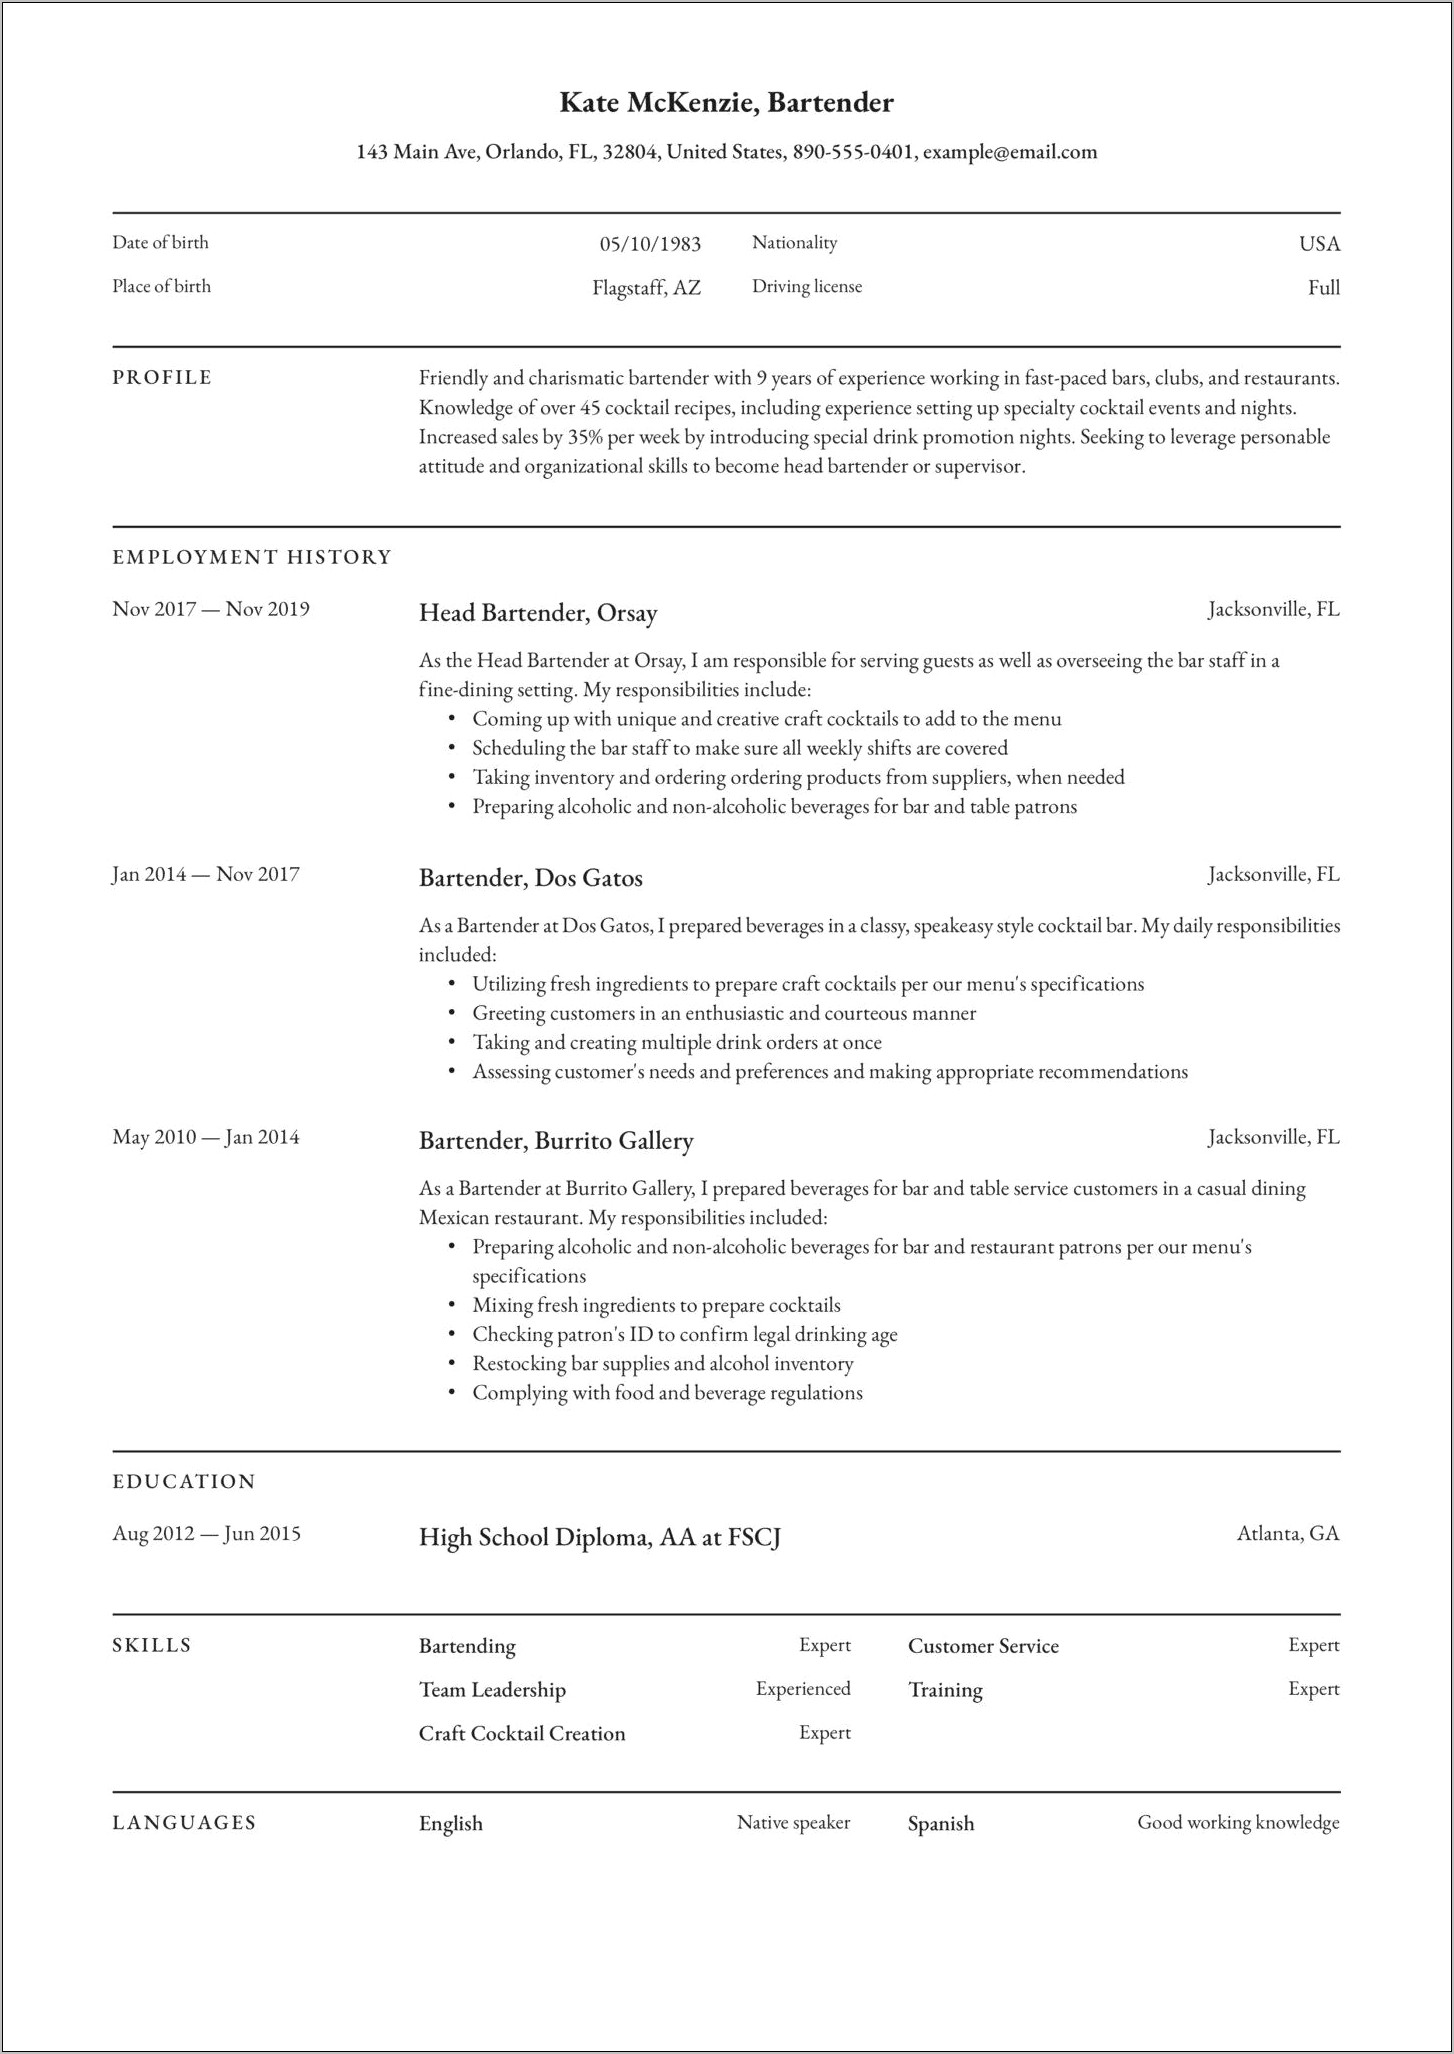 Combination Resume Sample From Bar Tender To Clerical